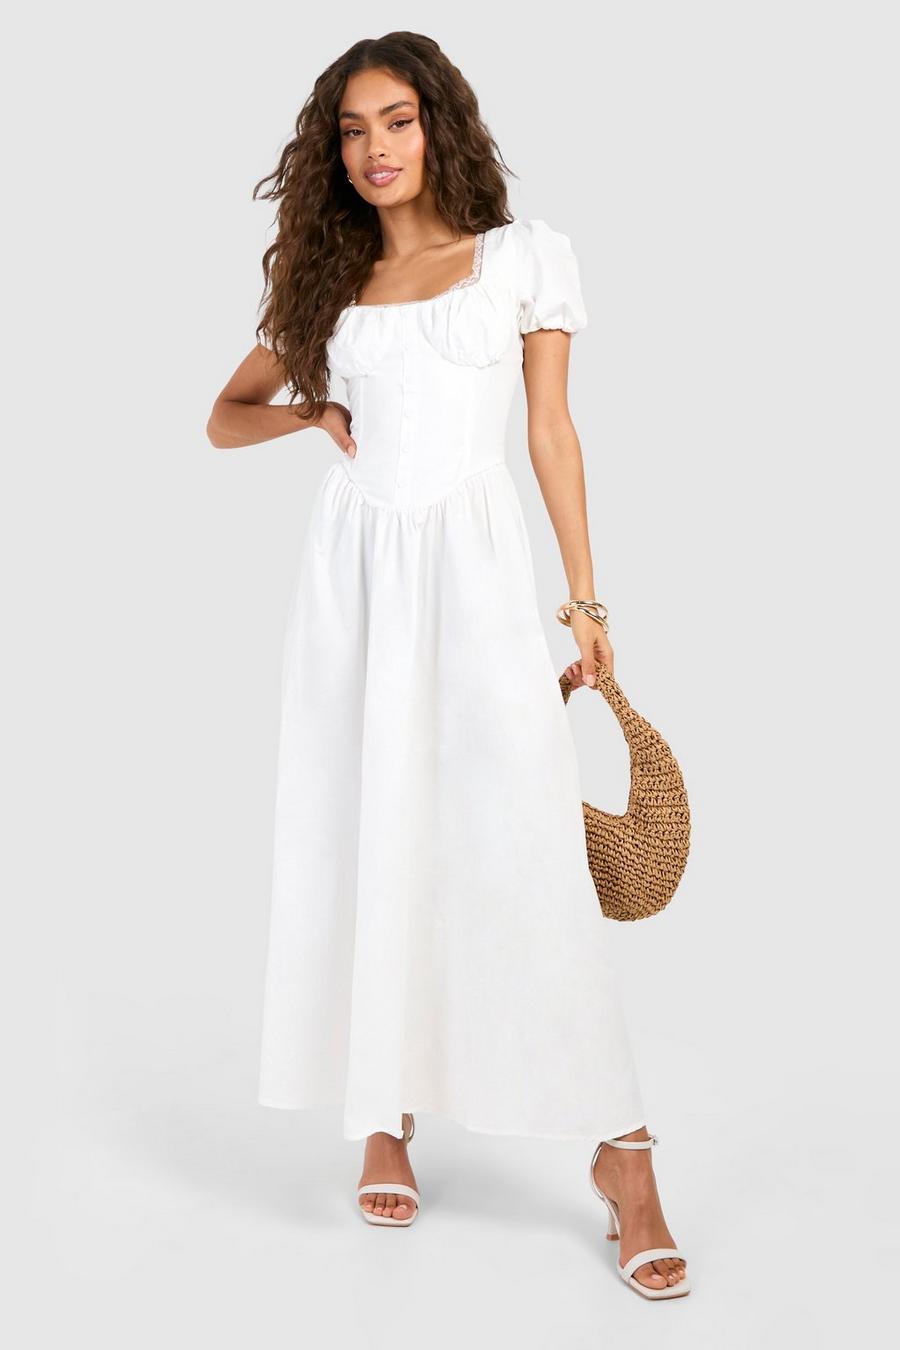 White All Occasion Wear